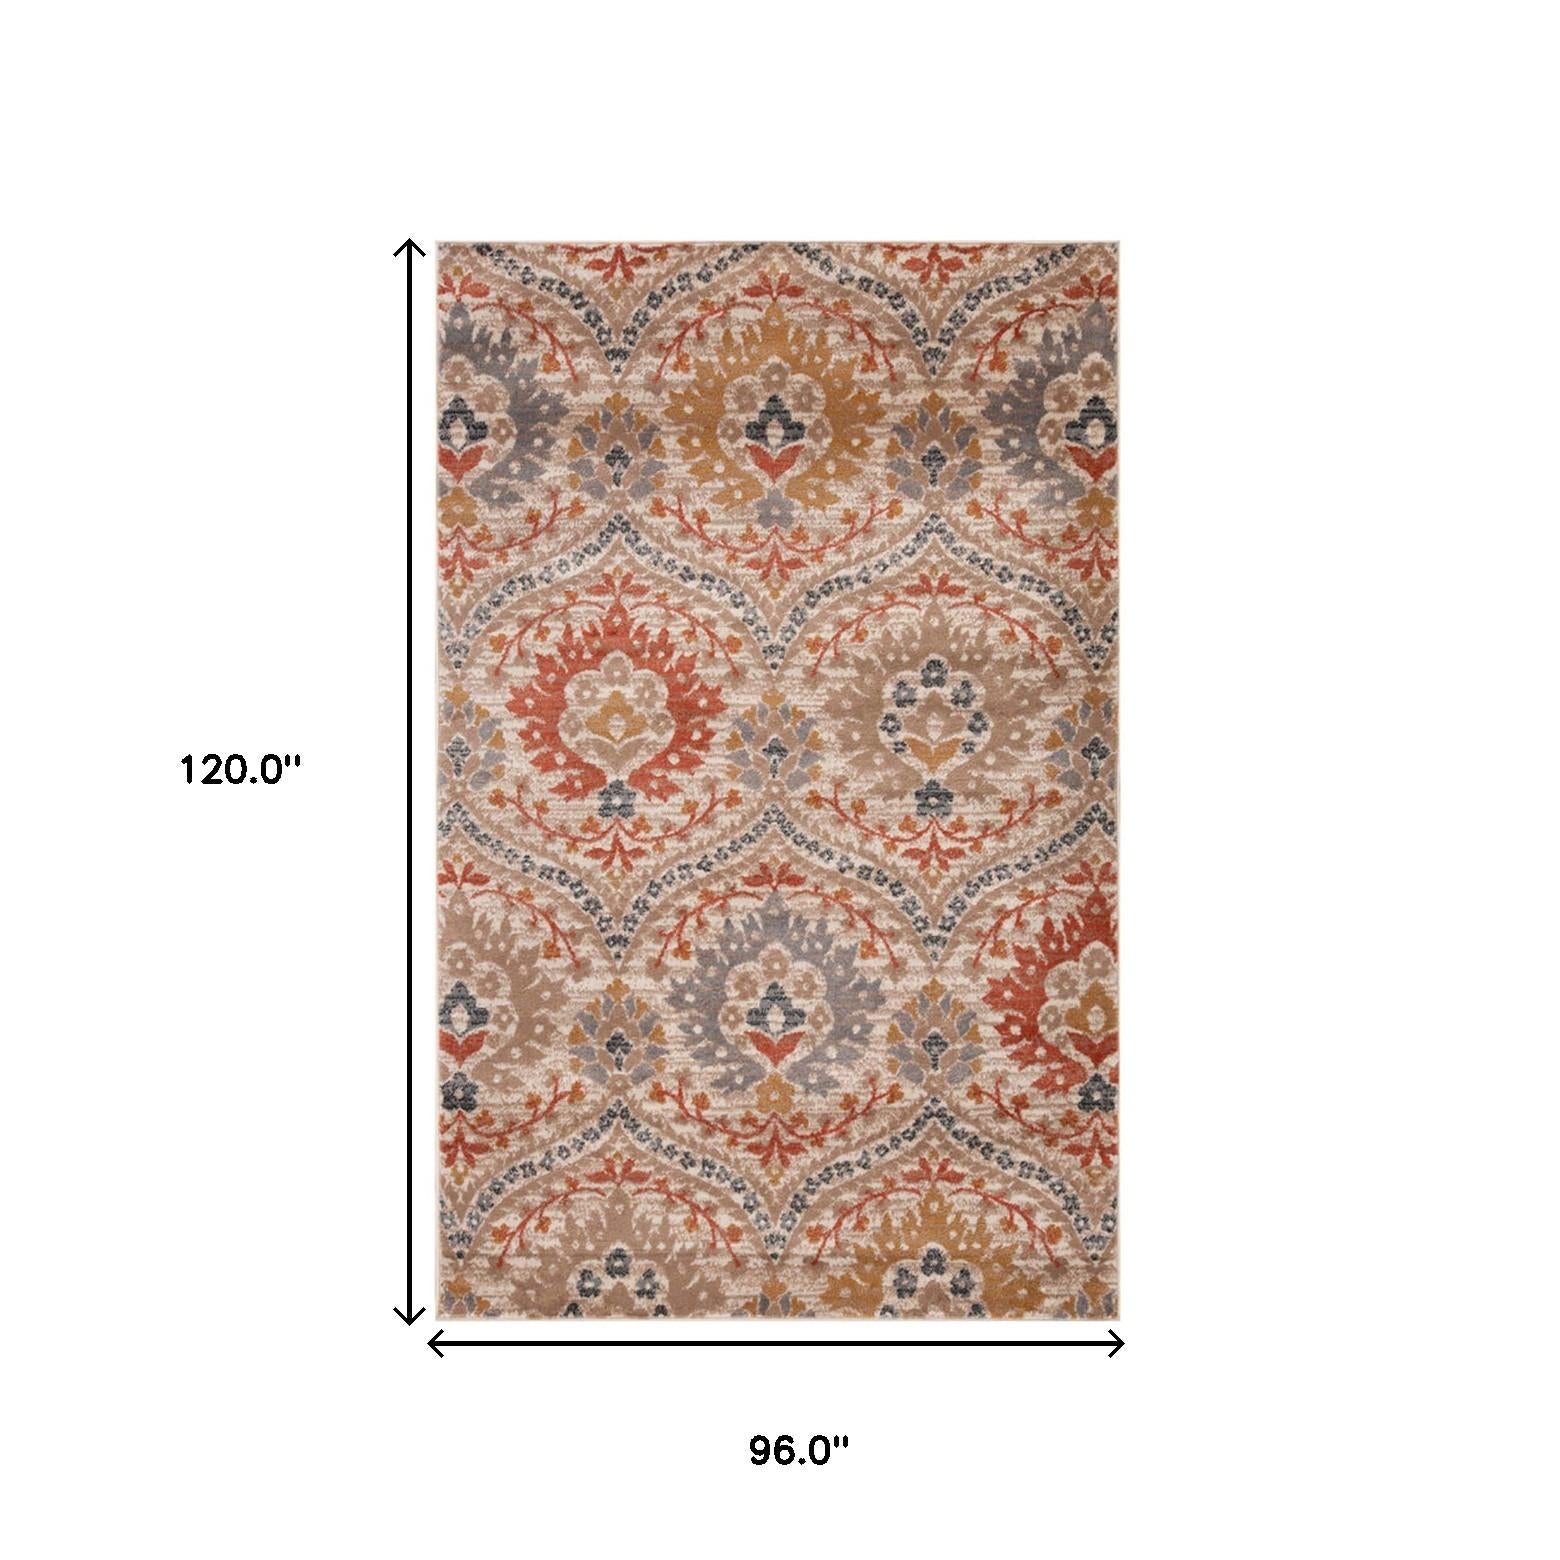 8' X 10' Ivory Orange And Gray Floral Stain Resistant Area Rug Default Title